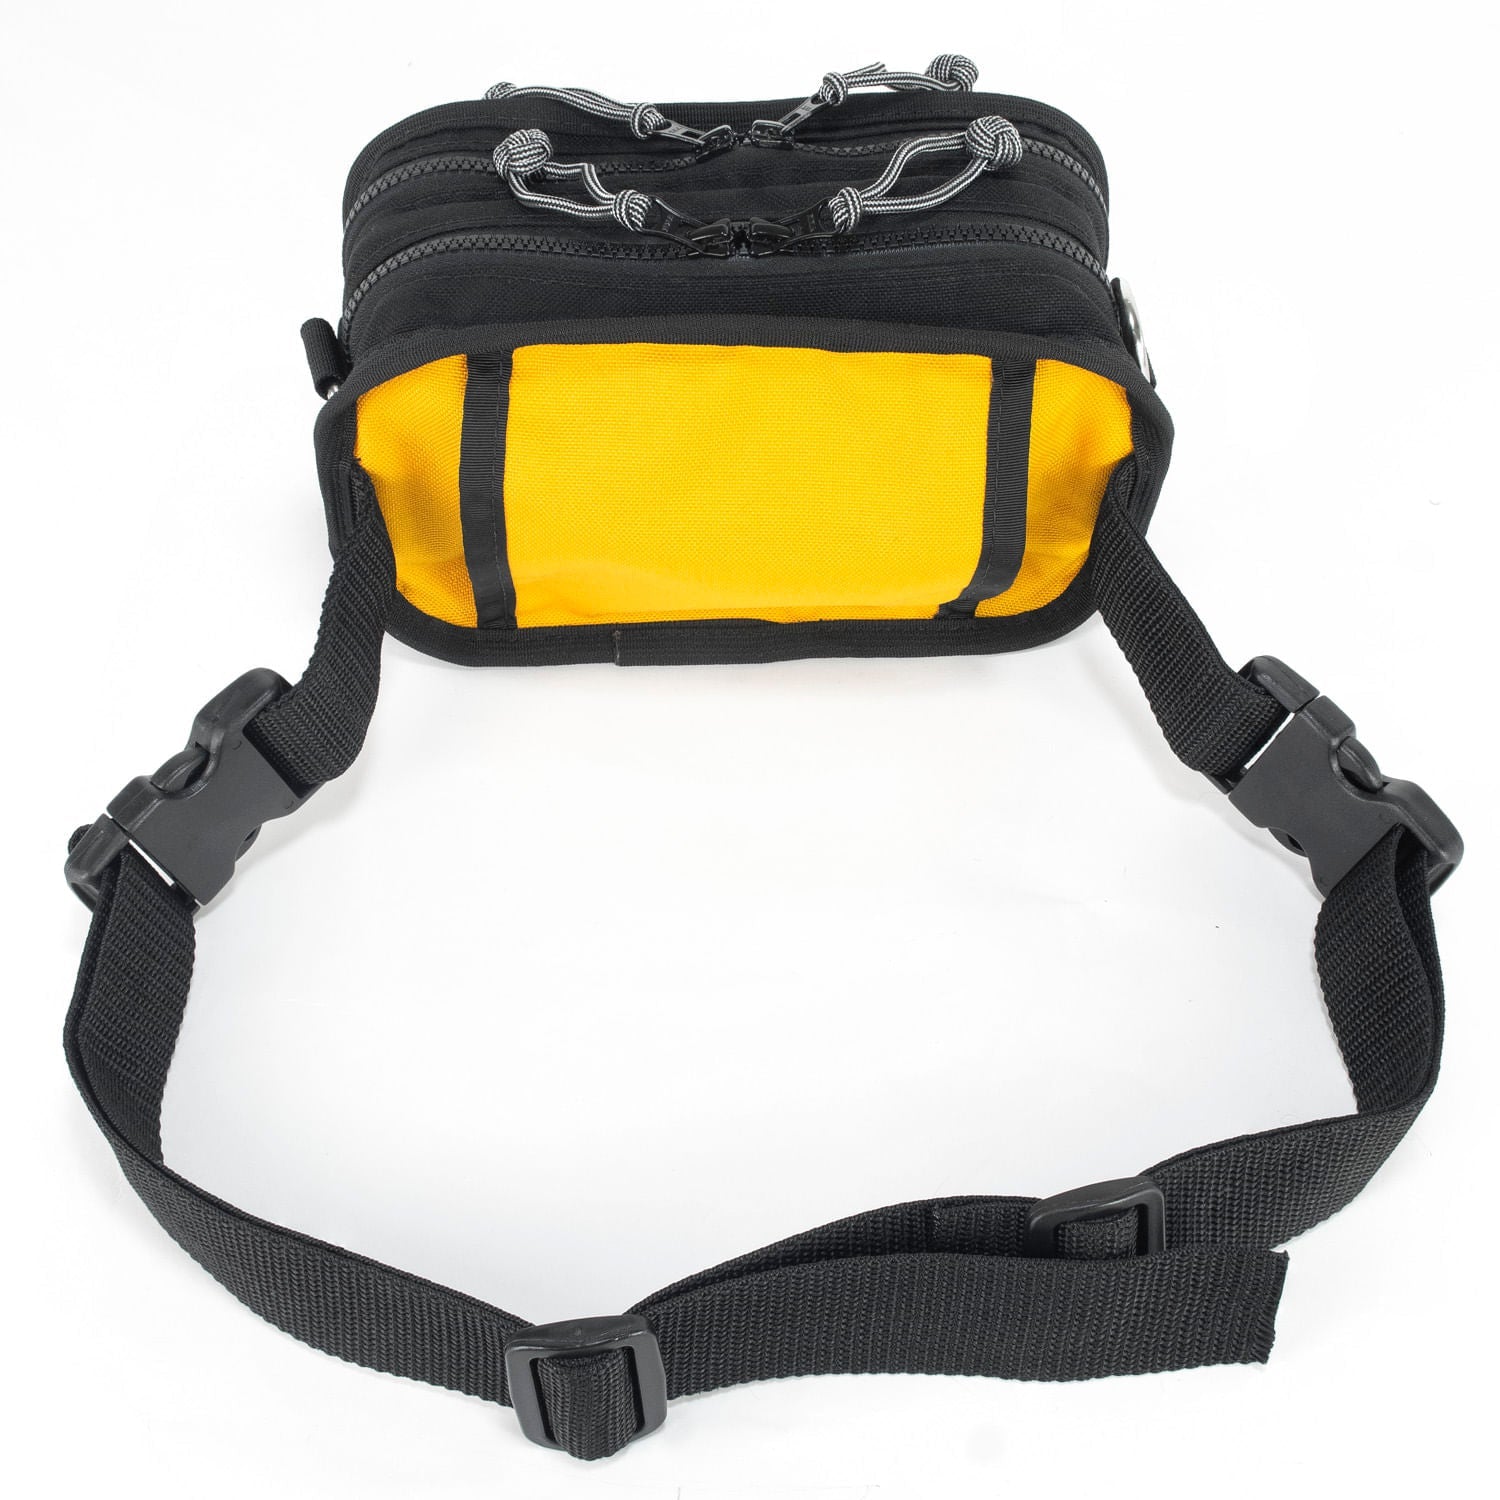 fanny pack with waist belt attached.